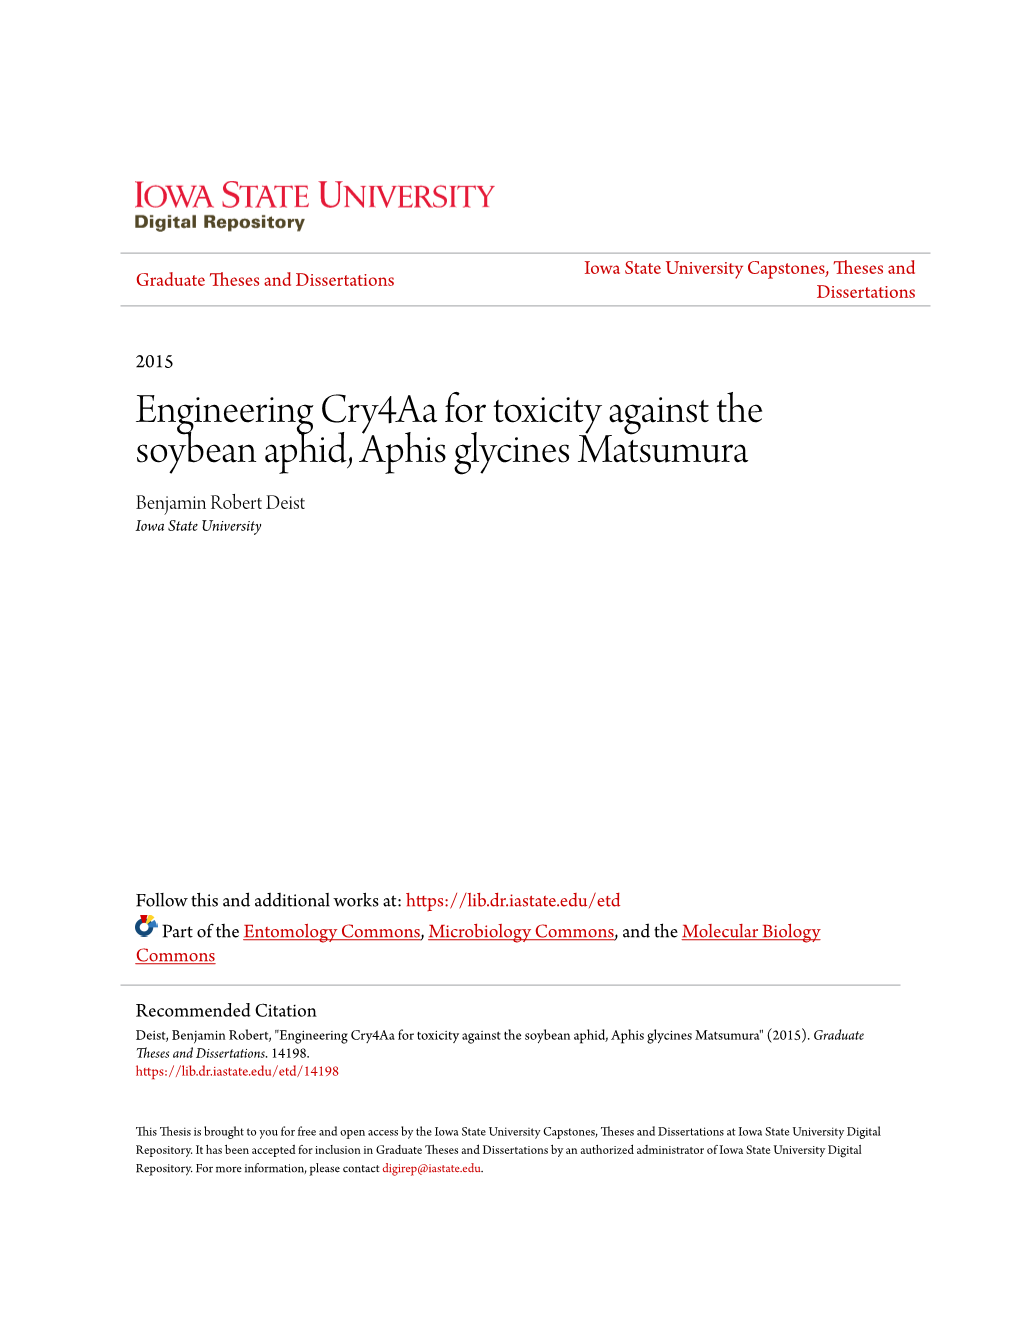 Engineering Cry4aa for Toxicity Against the Soybean Aphid, Aphis Glycines Matsumura Benjamin Robert Deist Iowa State University